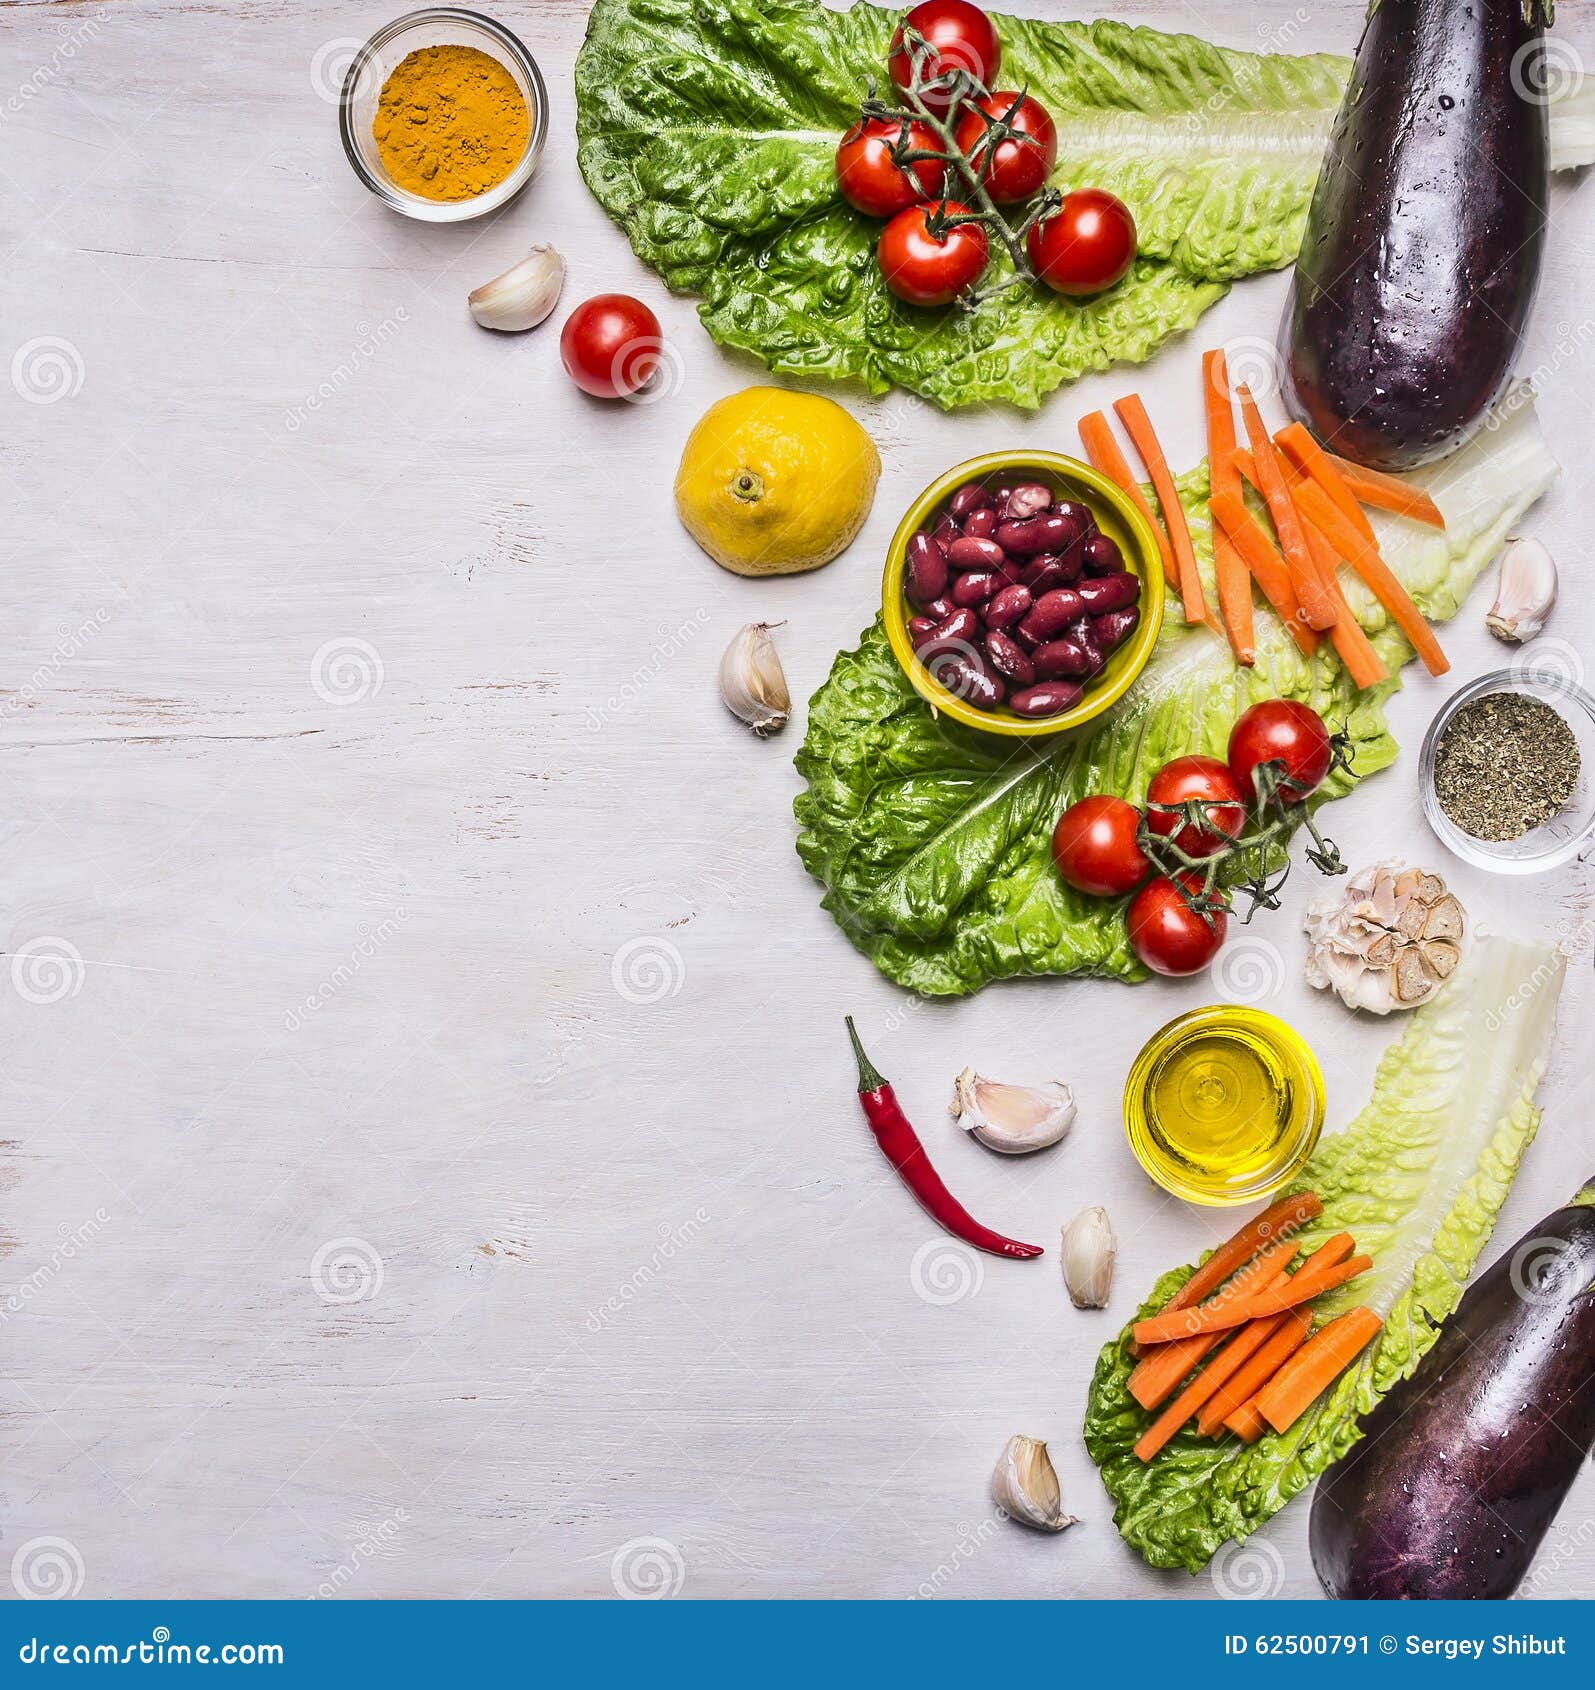 Healthy Food And Diet Nutrition Concept, Fresh Vegetables, Border, Place  For Text On Wooden Rustic Background Top View Vegetarian Stock Photo  62500791 - Megapixl